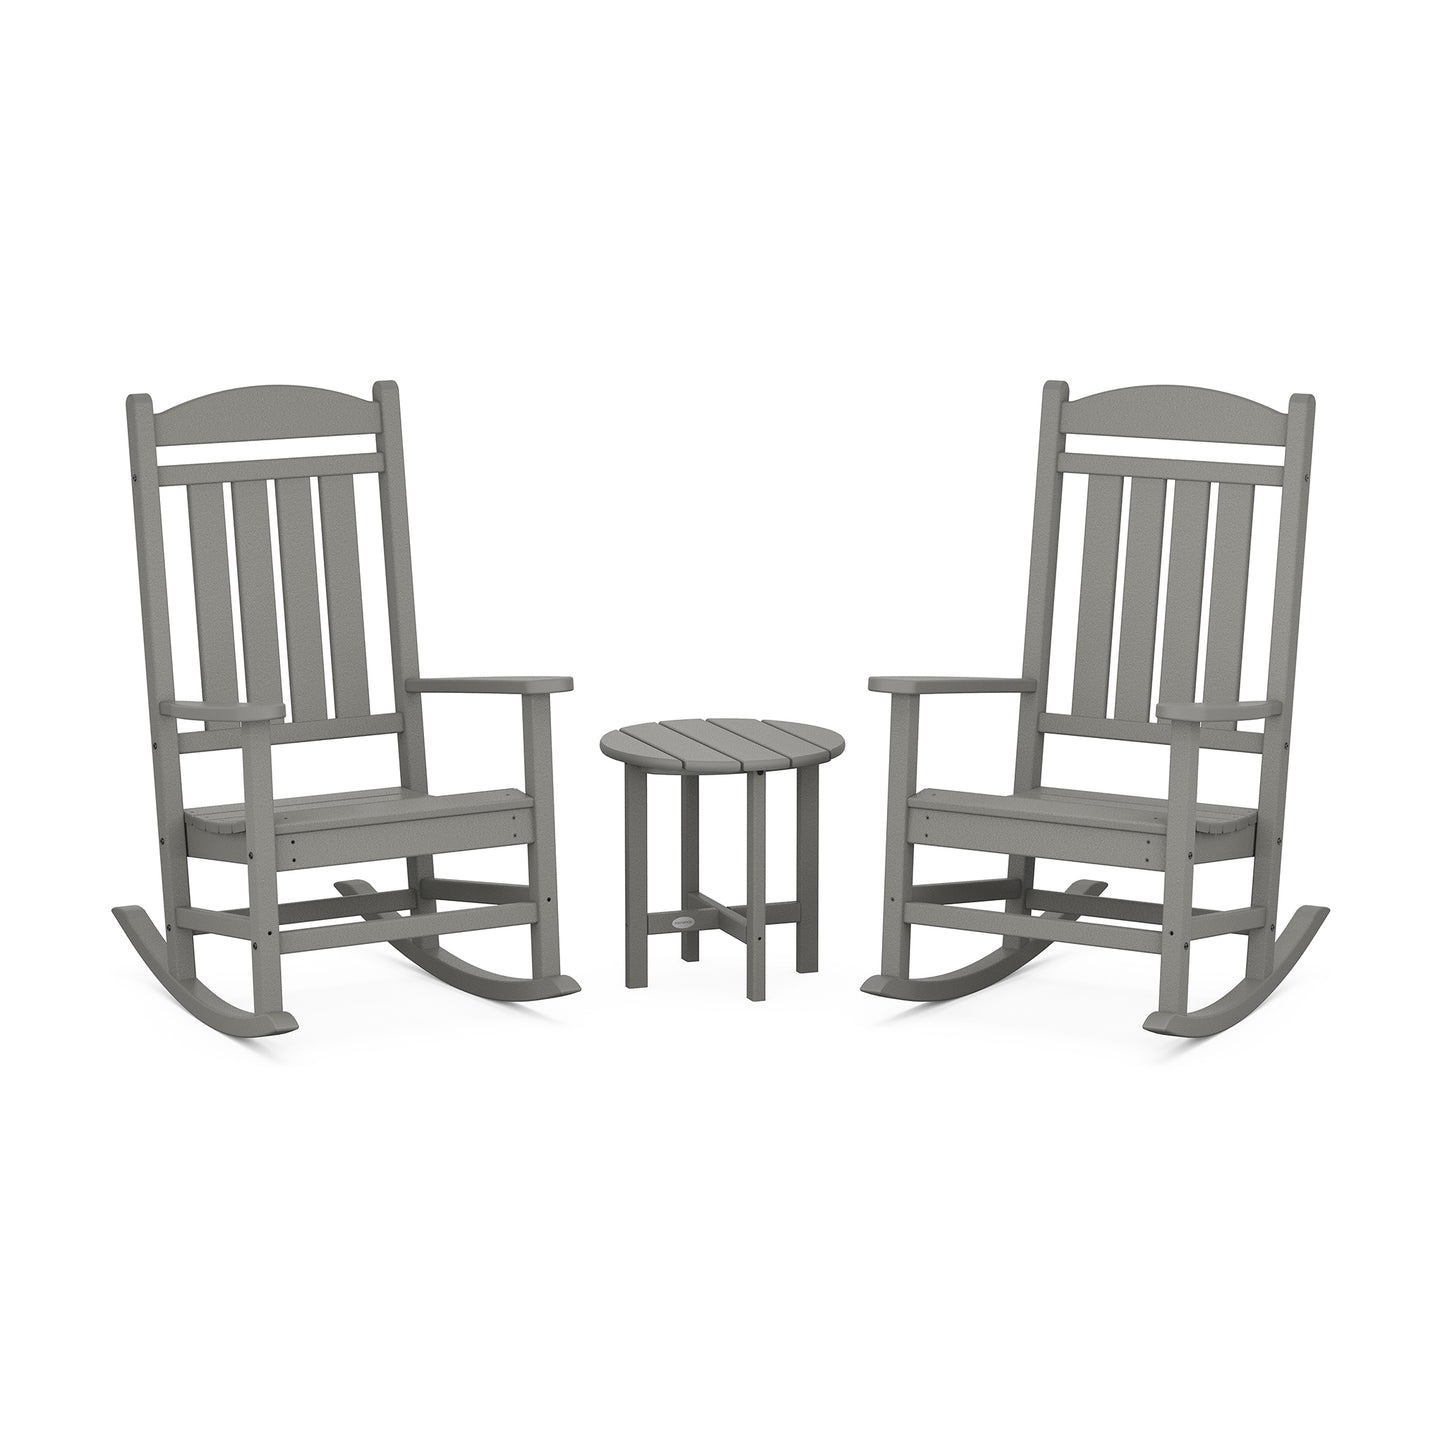 Two gray POLYWOOD Presidential 3-Piece Rocker Sets facing each other with a small matching side table in between, set against a white background.